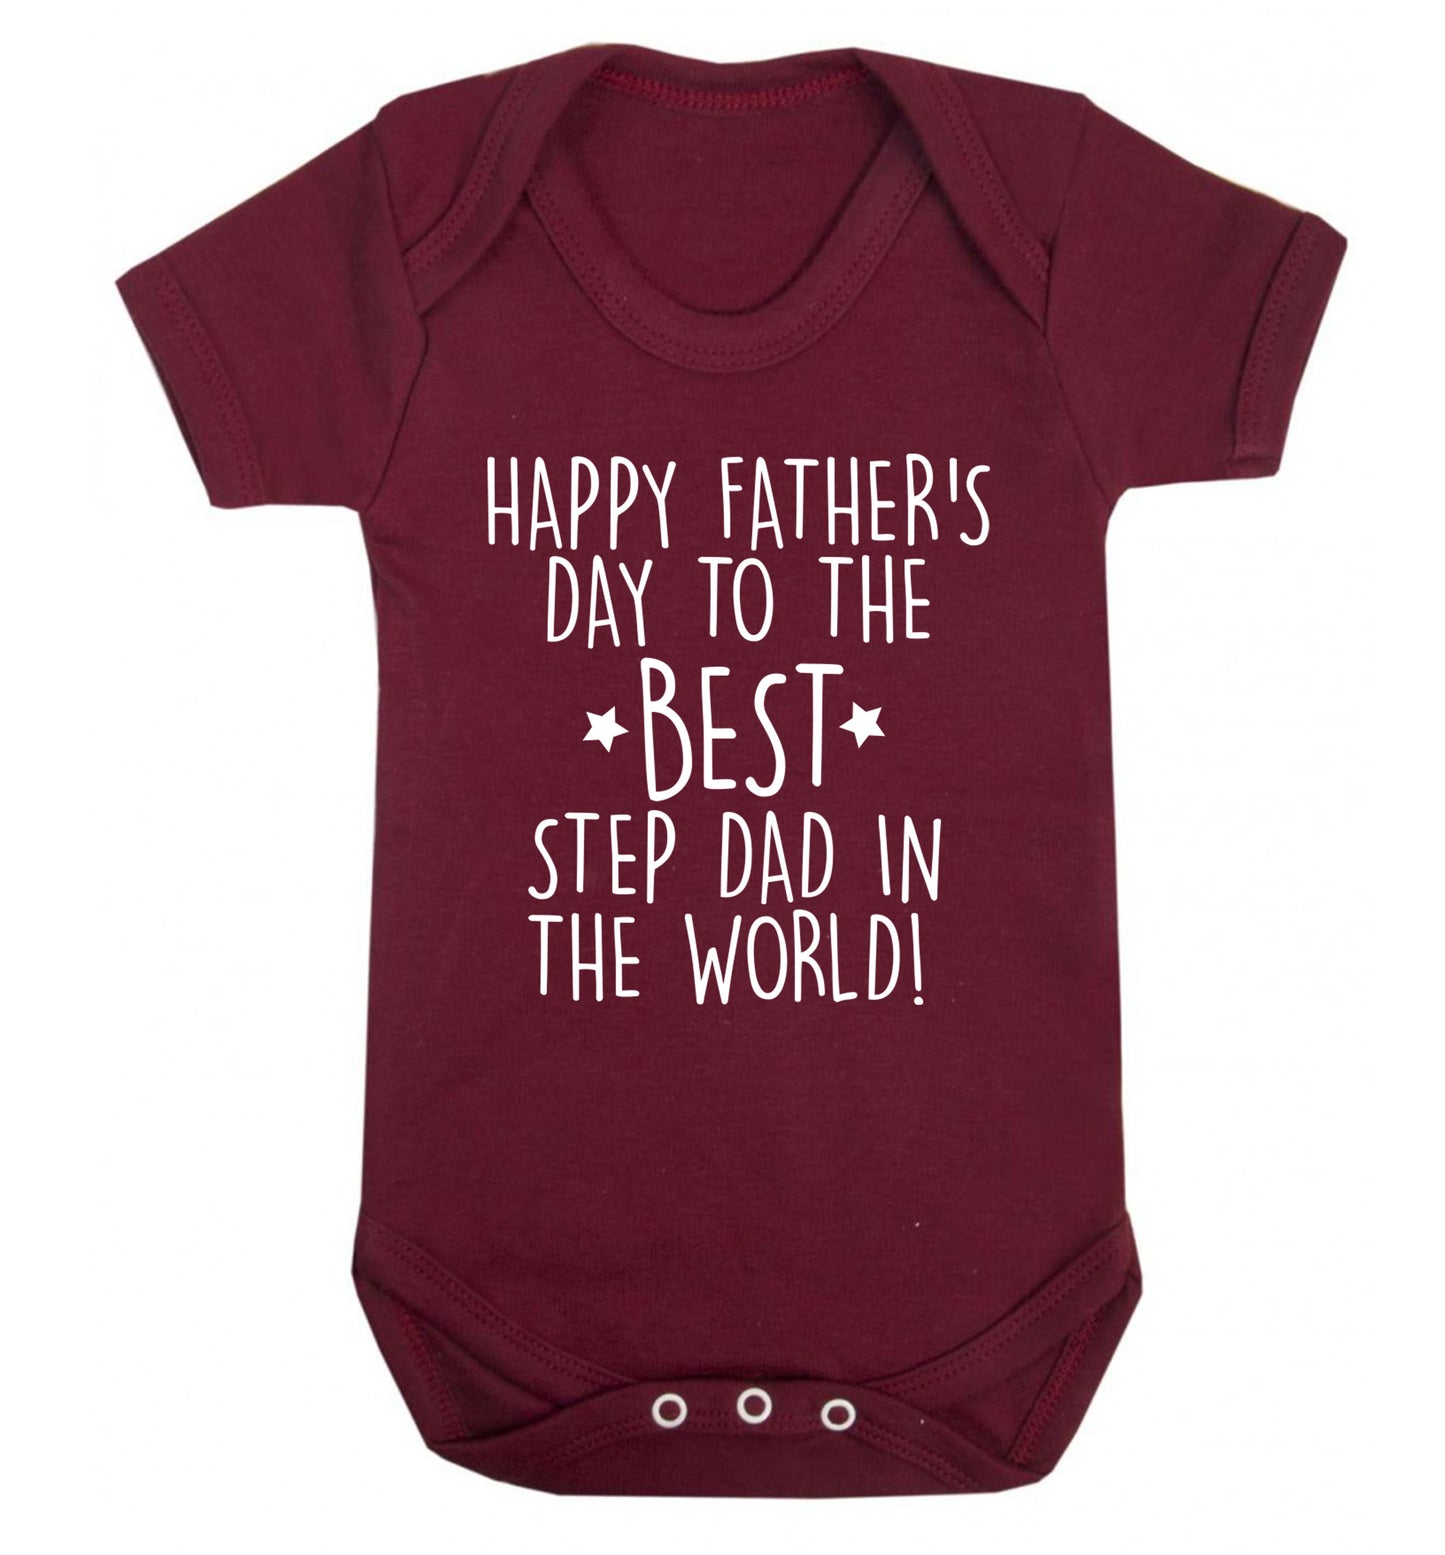 Happy Father's day to the best step dad in the world! Baby Vest maroon 18-24 months